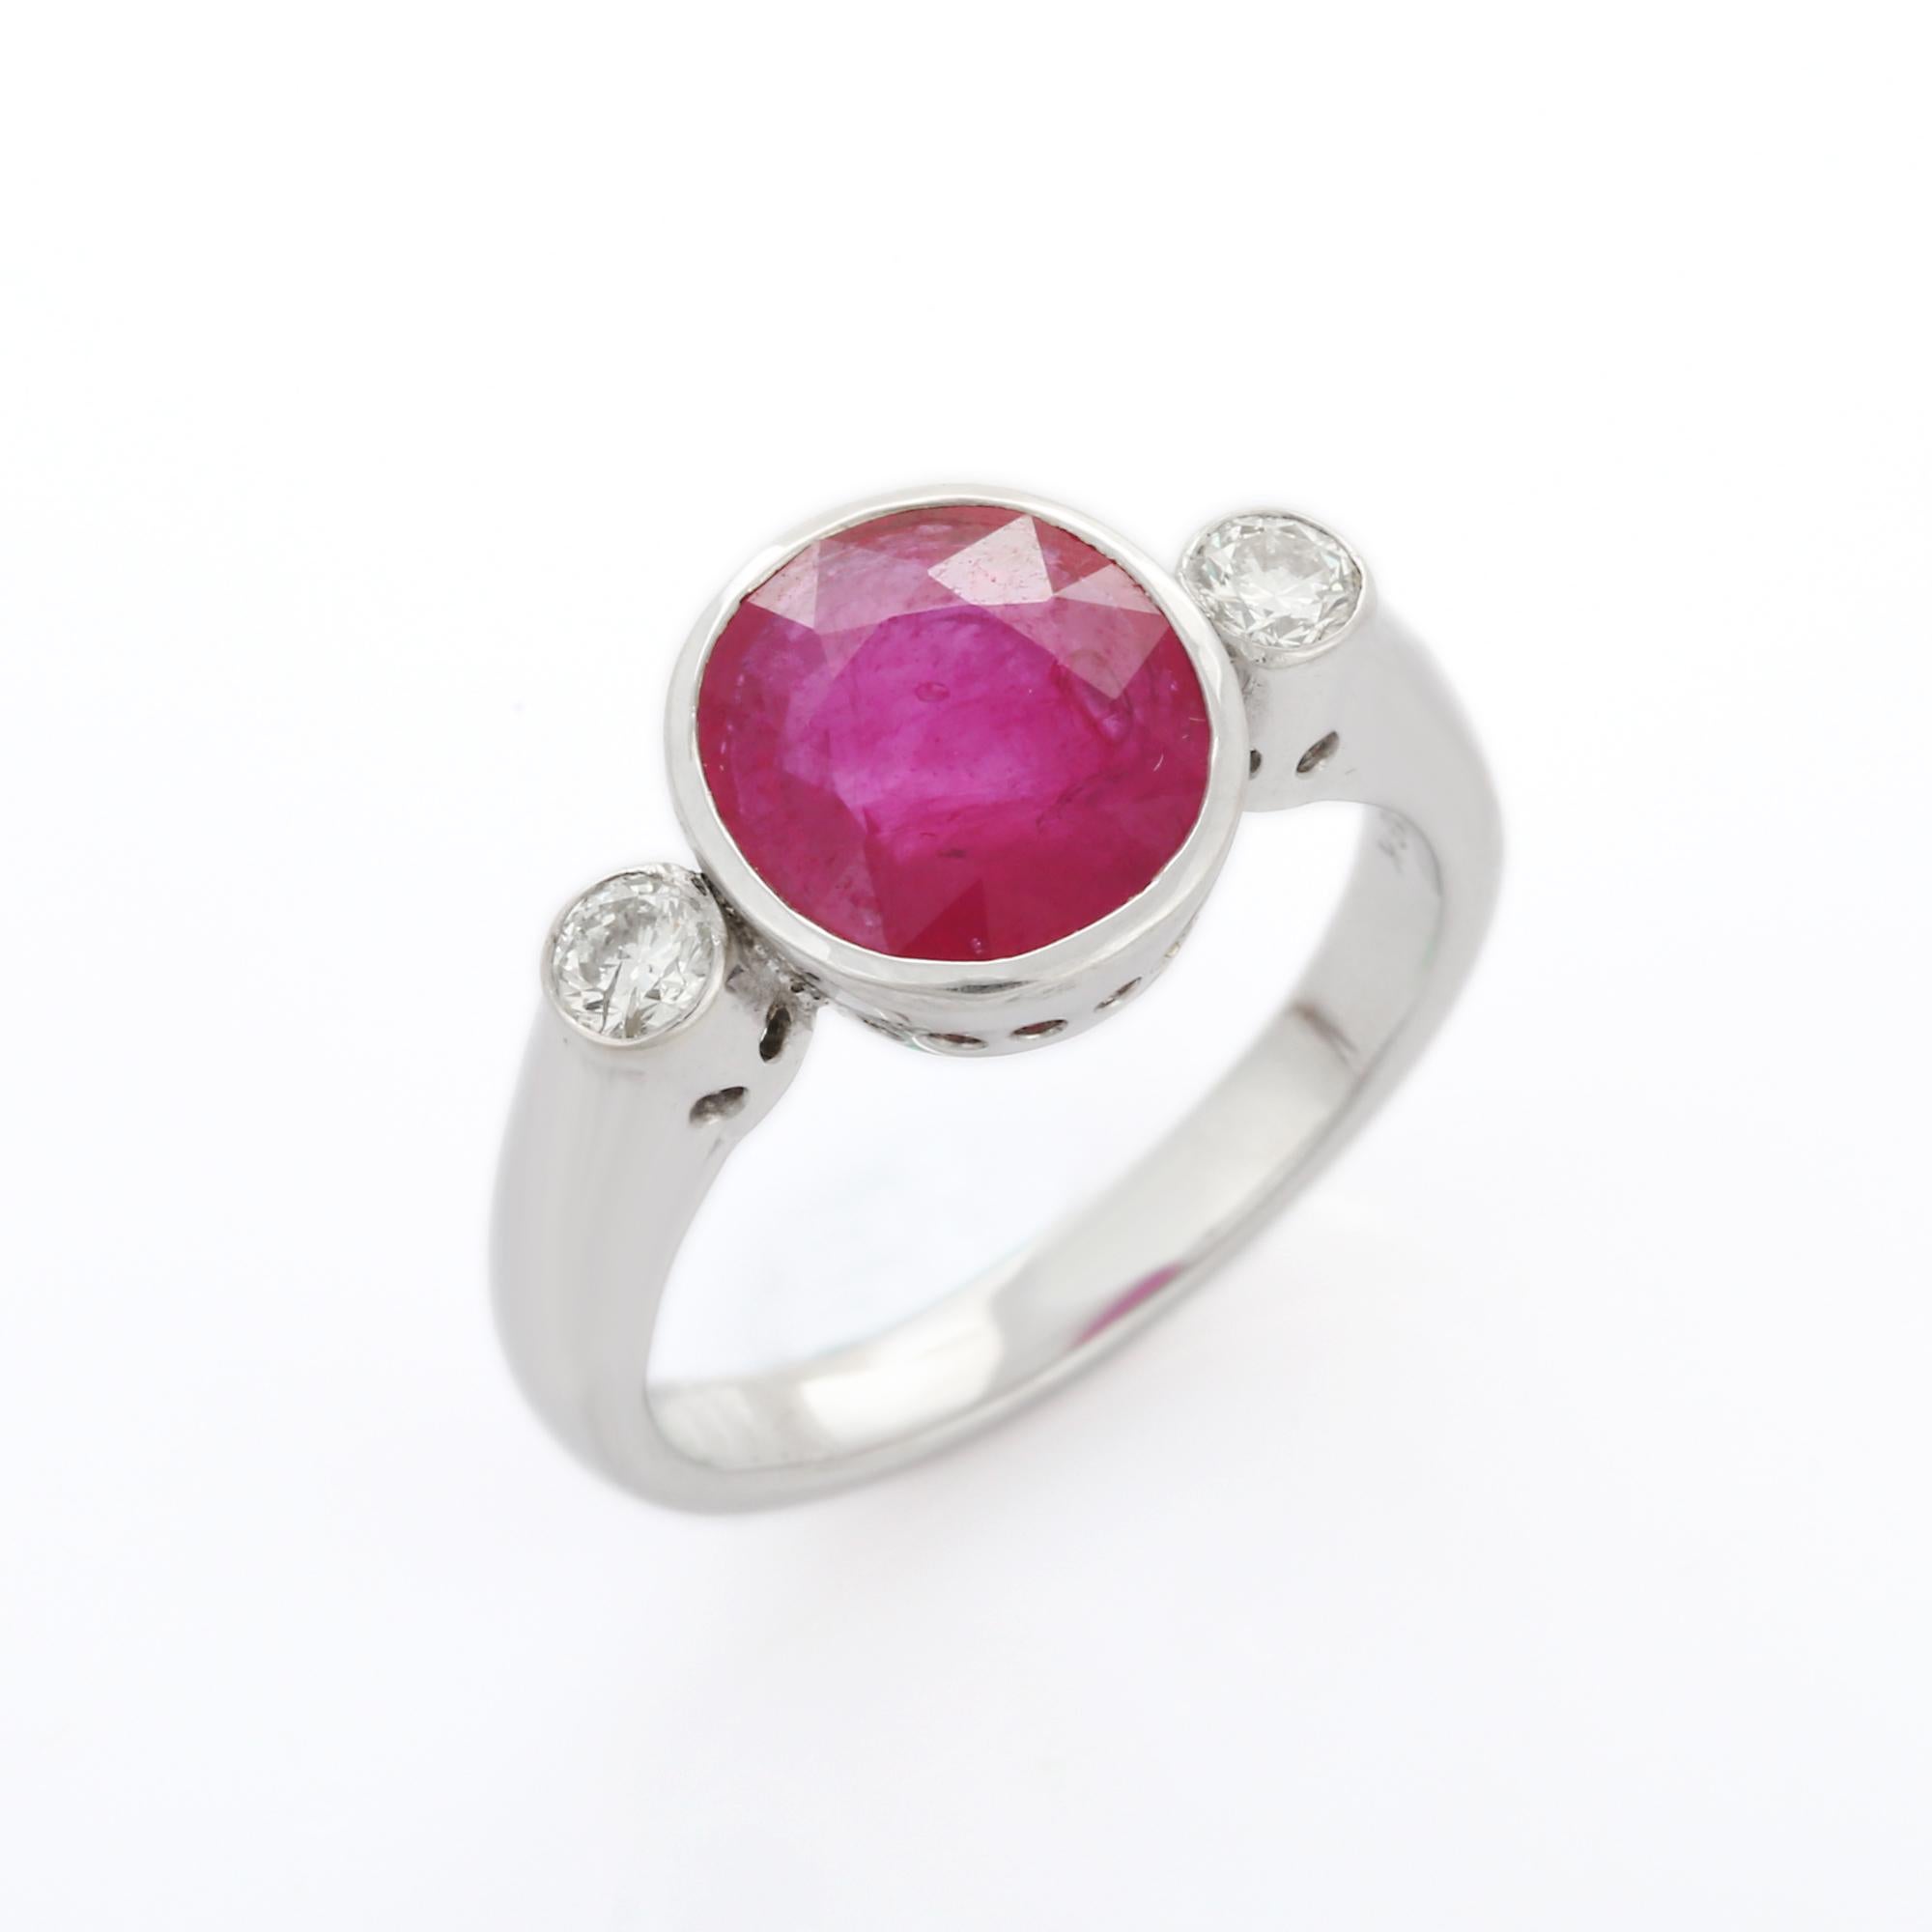 For Sale:  3 Carat Classical Round Cut Ruby and Diamond Three Stone Ring in 18K White Gold  6